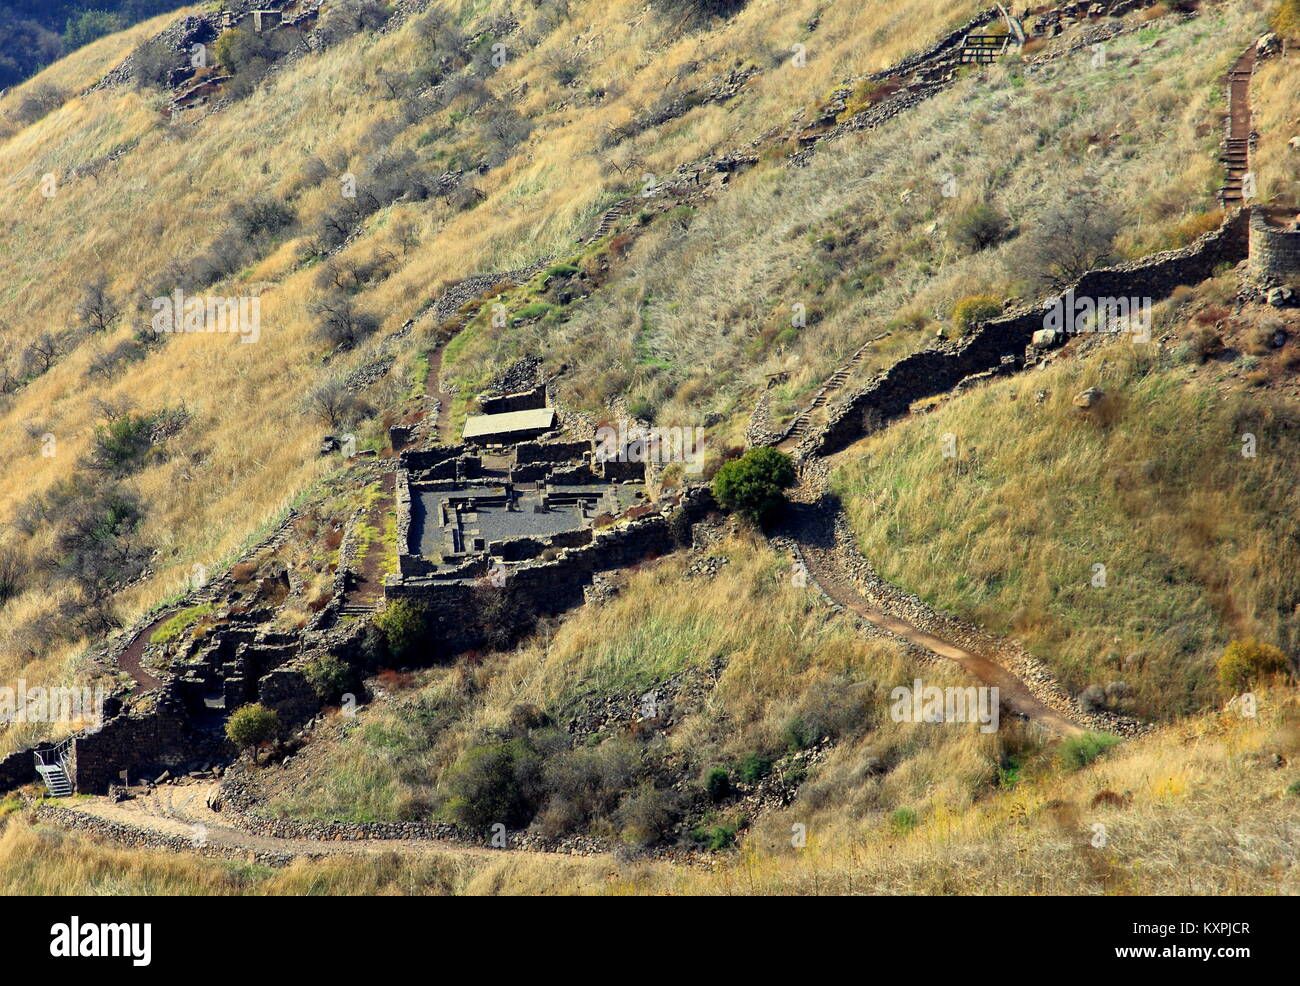 Israeli national park Gamla fortress at the Golan Heights - symbol of heroism Stock Photo